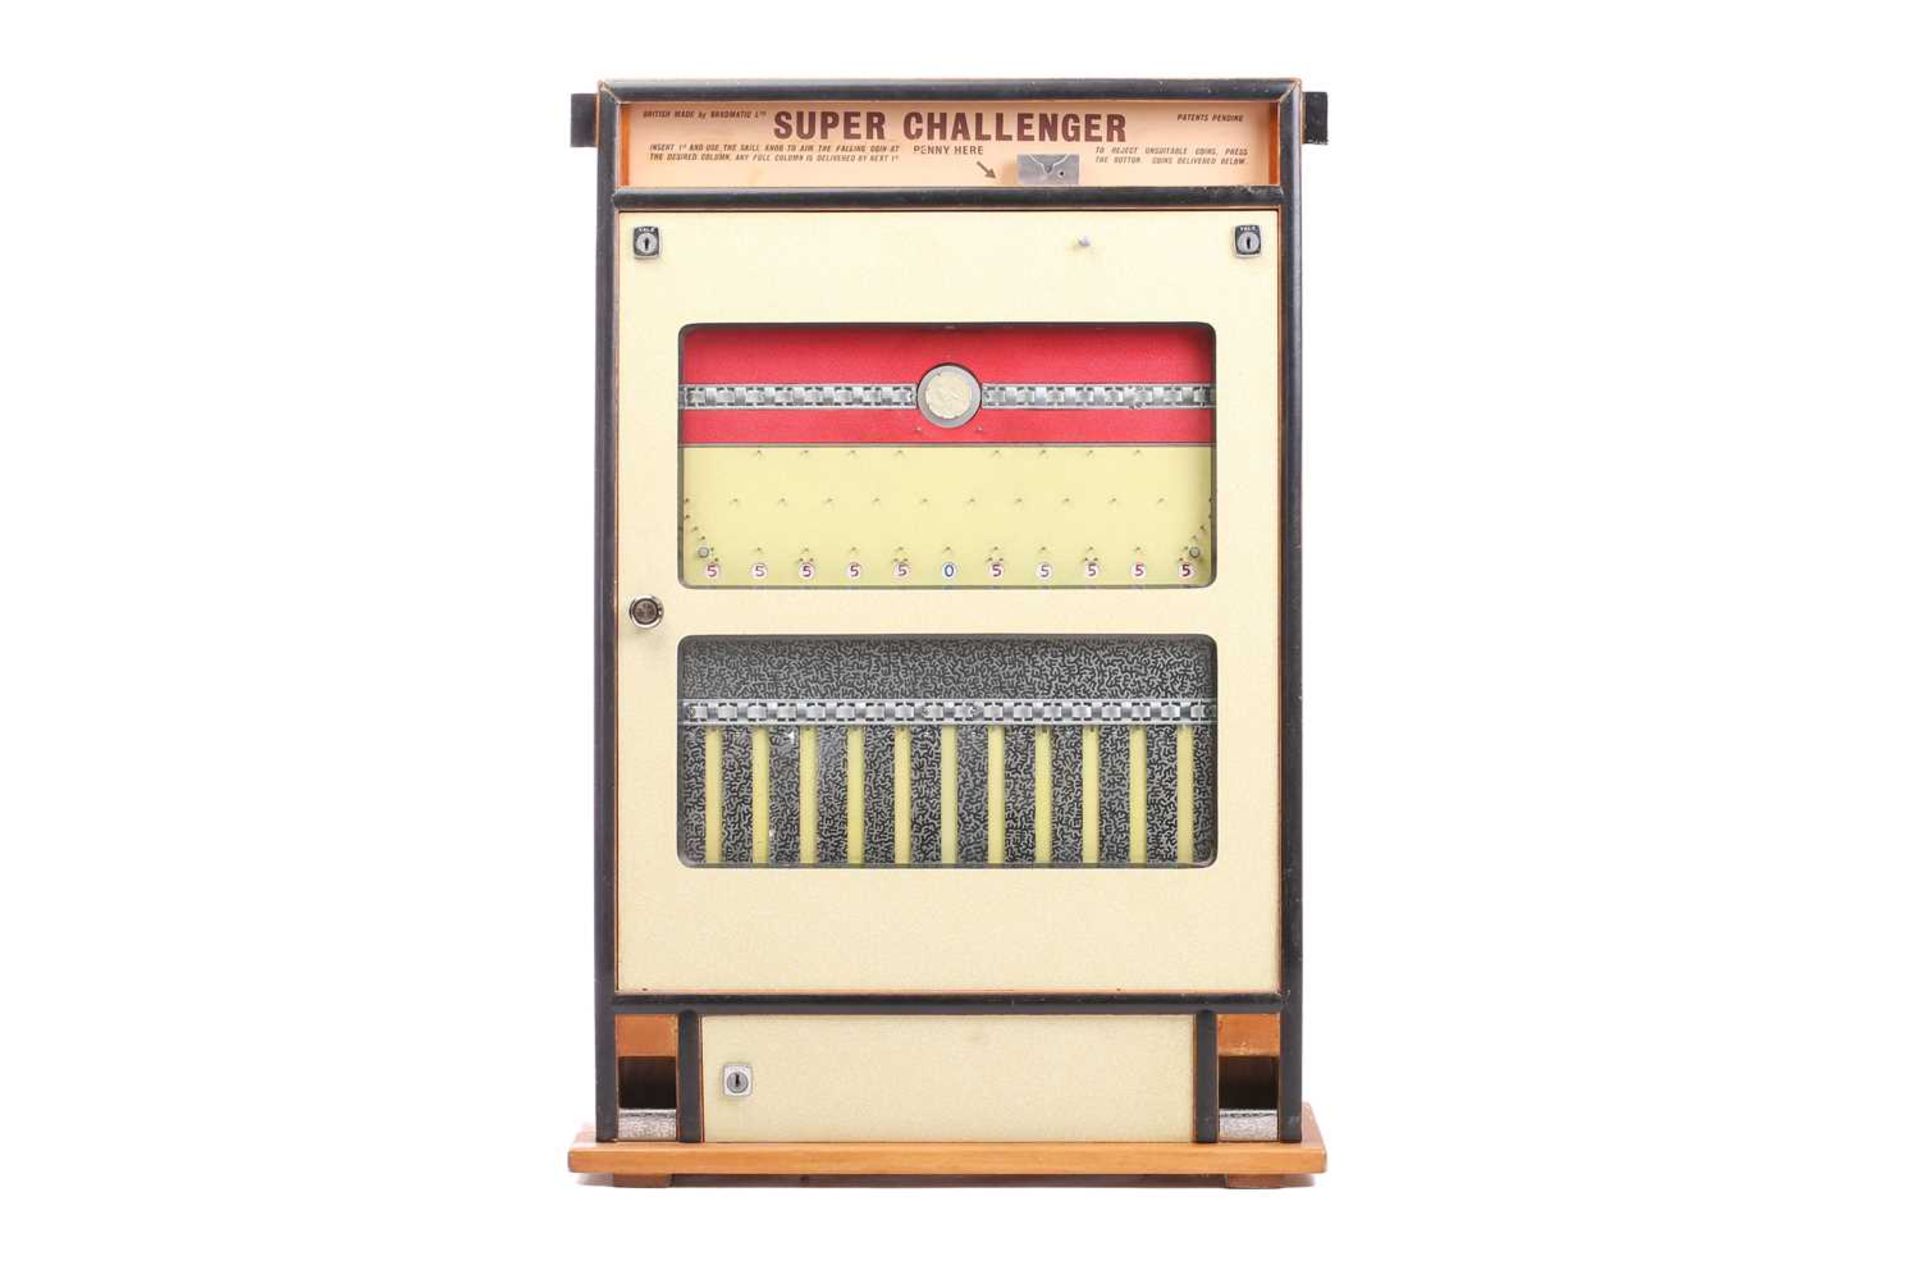 A Bradmatic Super Challenger 'Penny Falls' arcade machine, mid-20th century, in apparent working